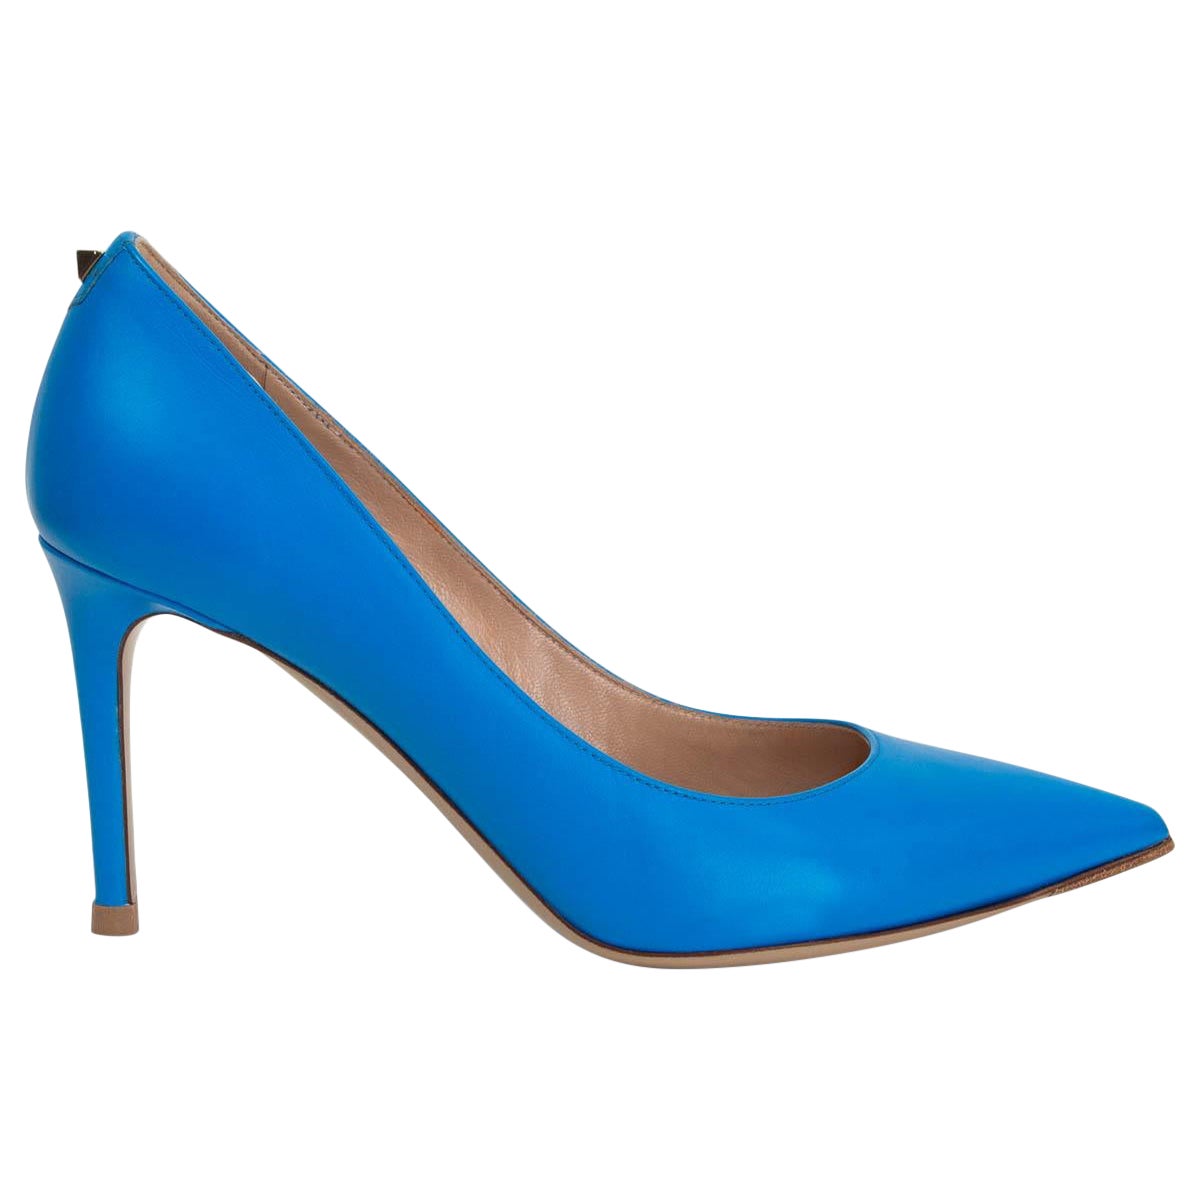 VALENTINO cyan blue leather ROCKSTUD 85 Pointed Toe Pumps Shoes 37.5 For Sale